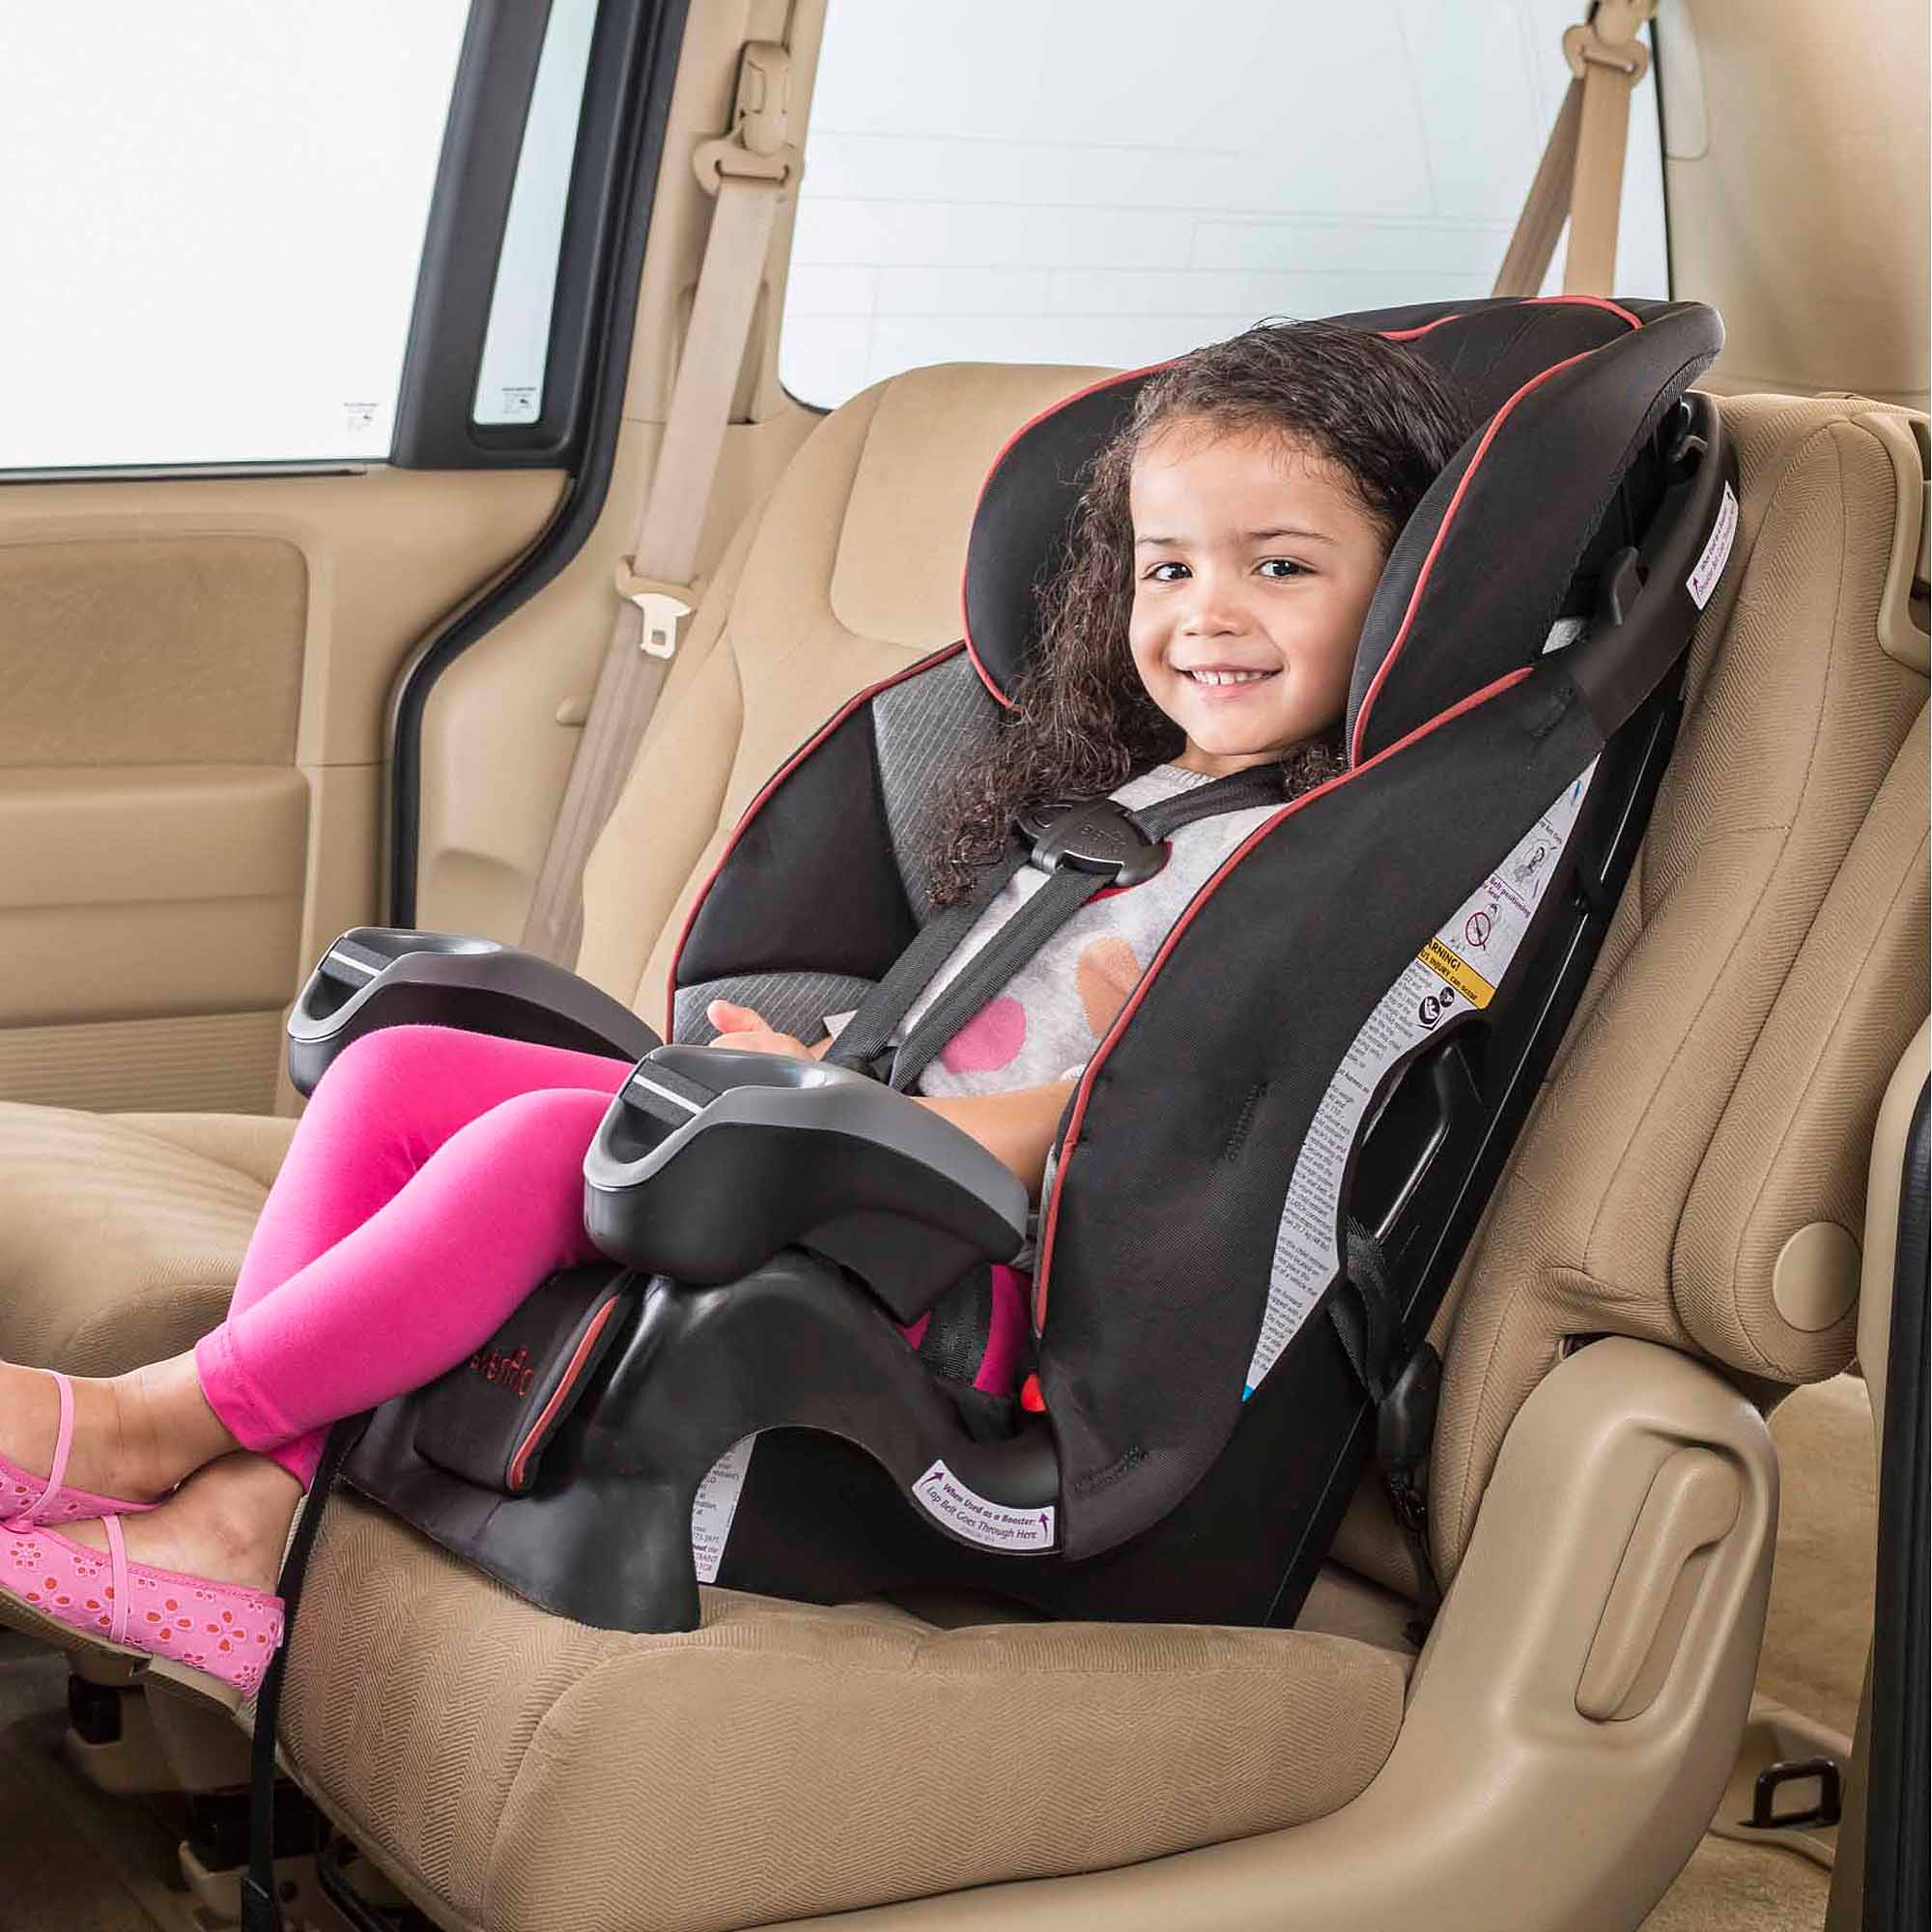 Evenflo Maestro Harness Booster Car Seat, choose your color - image 2 of 6